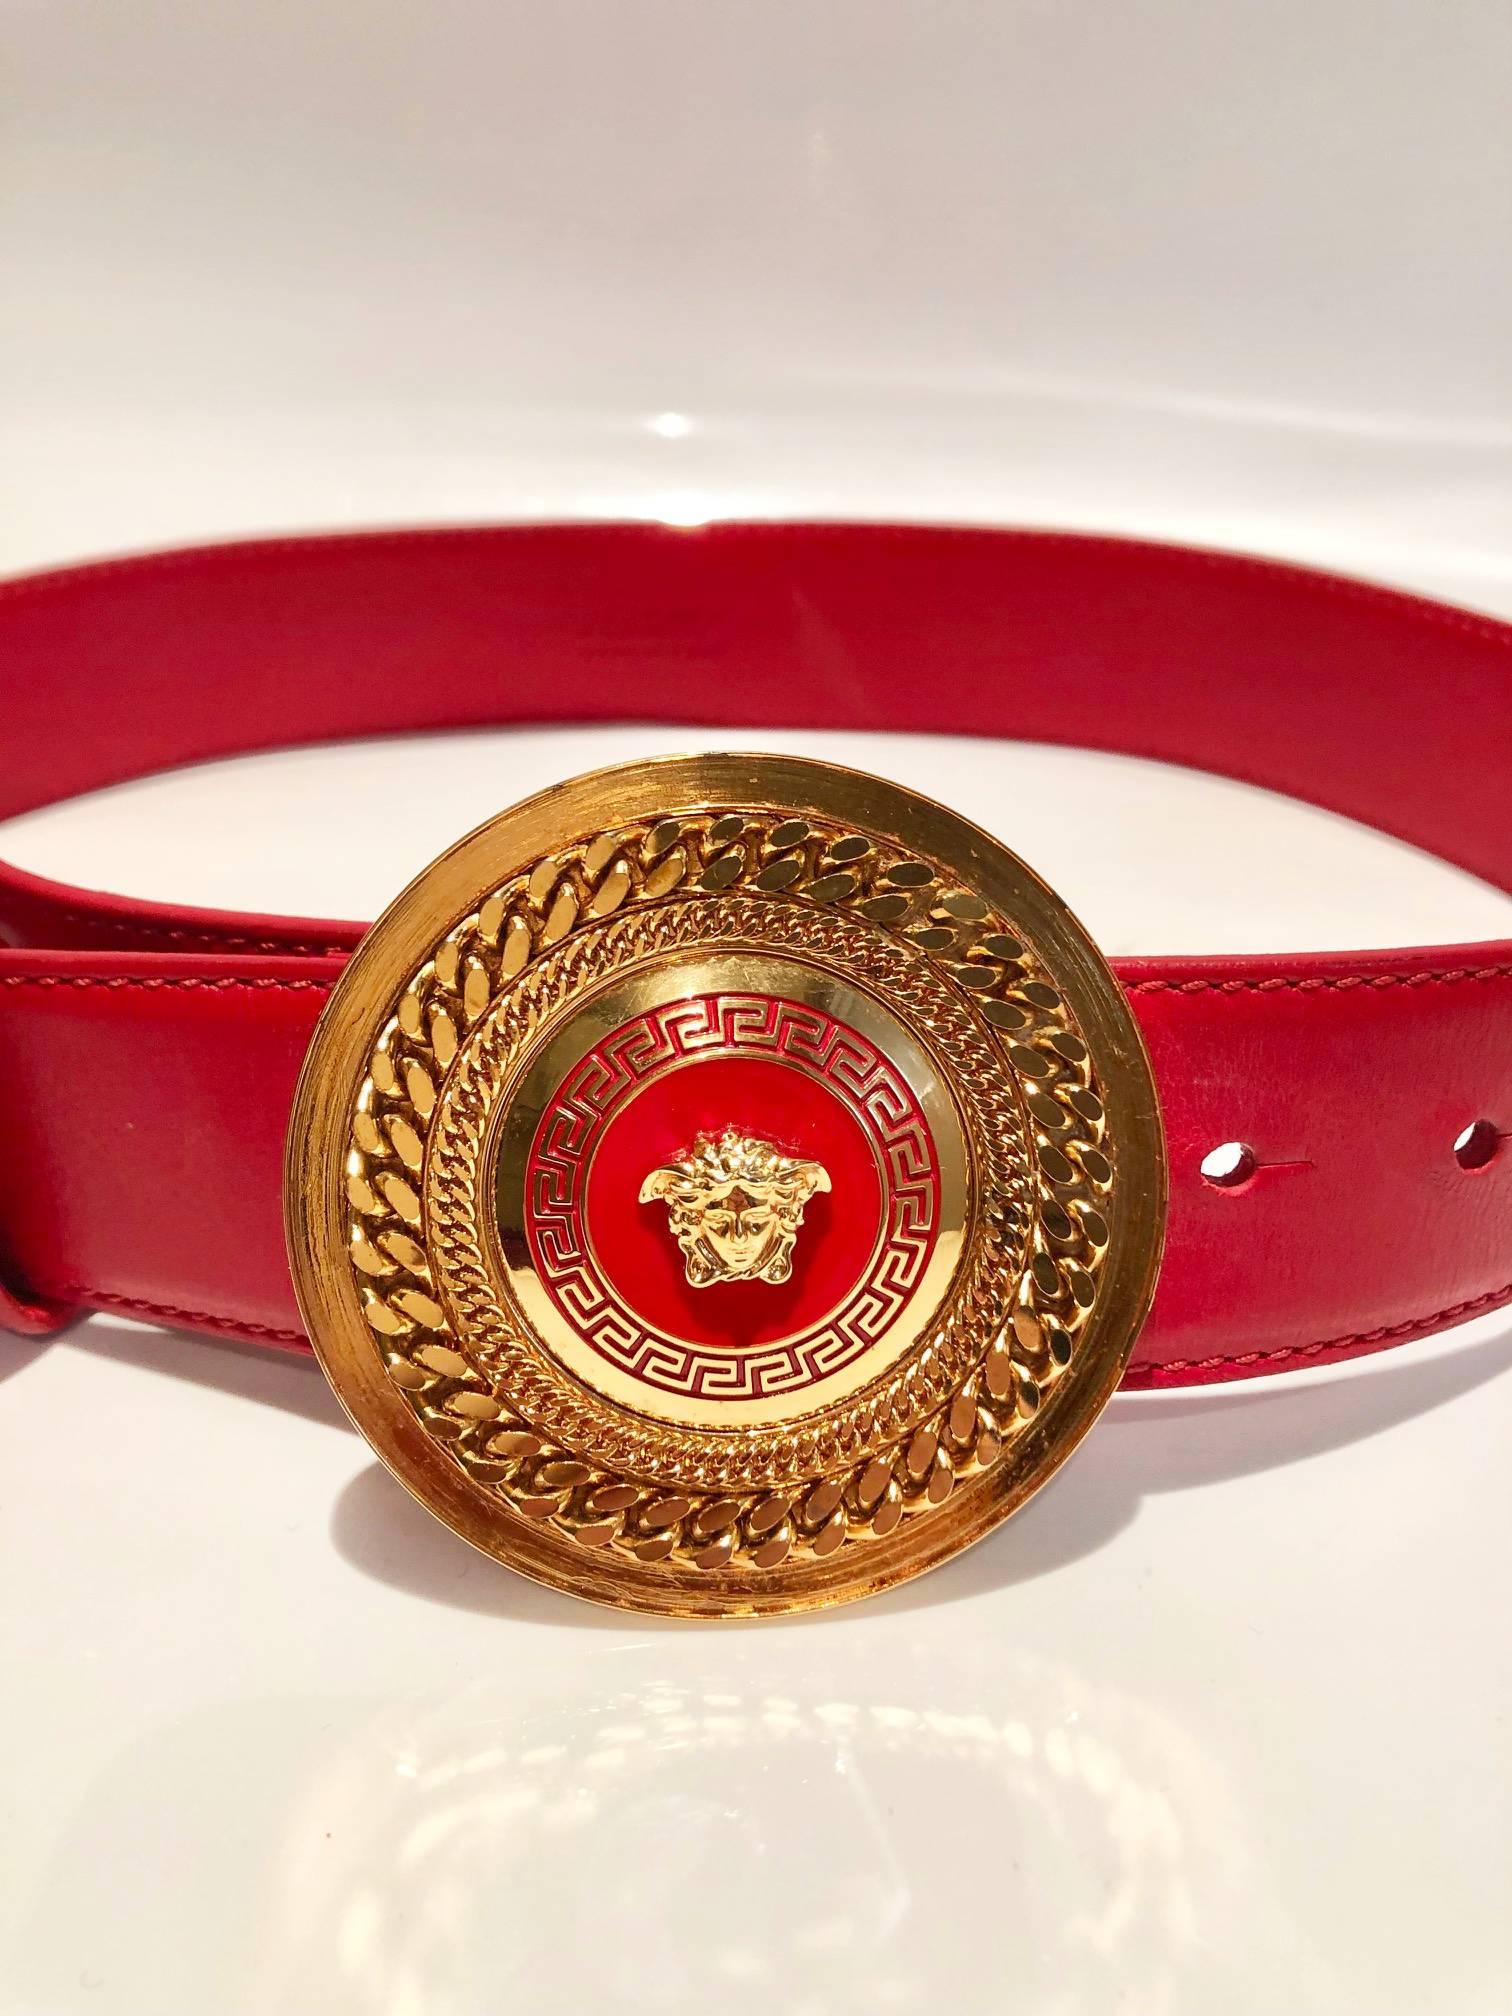 Rare Versace red leather belt featuring Gold tone metal Medusa medallion buckle belt, chain detail around medusa head 

Condition: 1980s, vintage, very good, wear consistent with wear, slight signs of usage in inside of buckle, barely